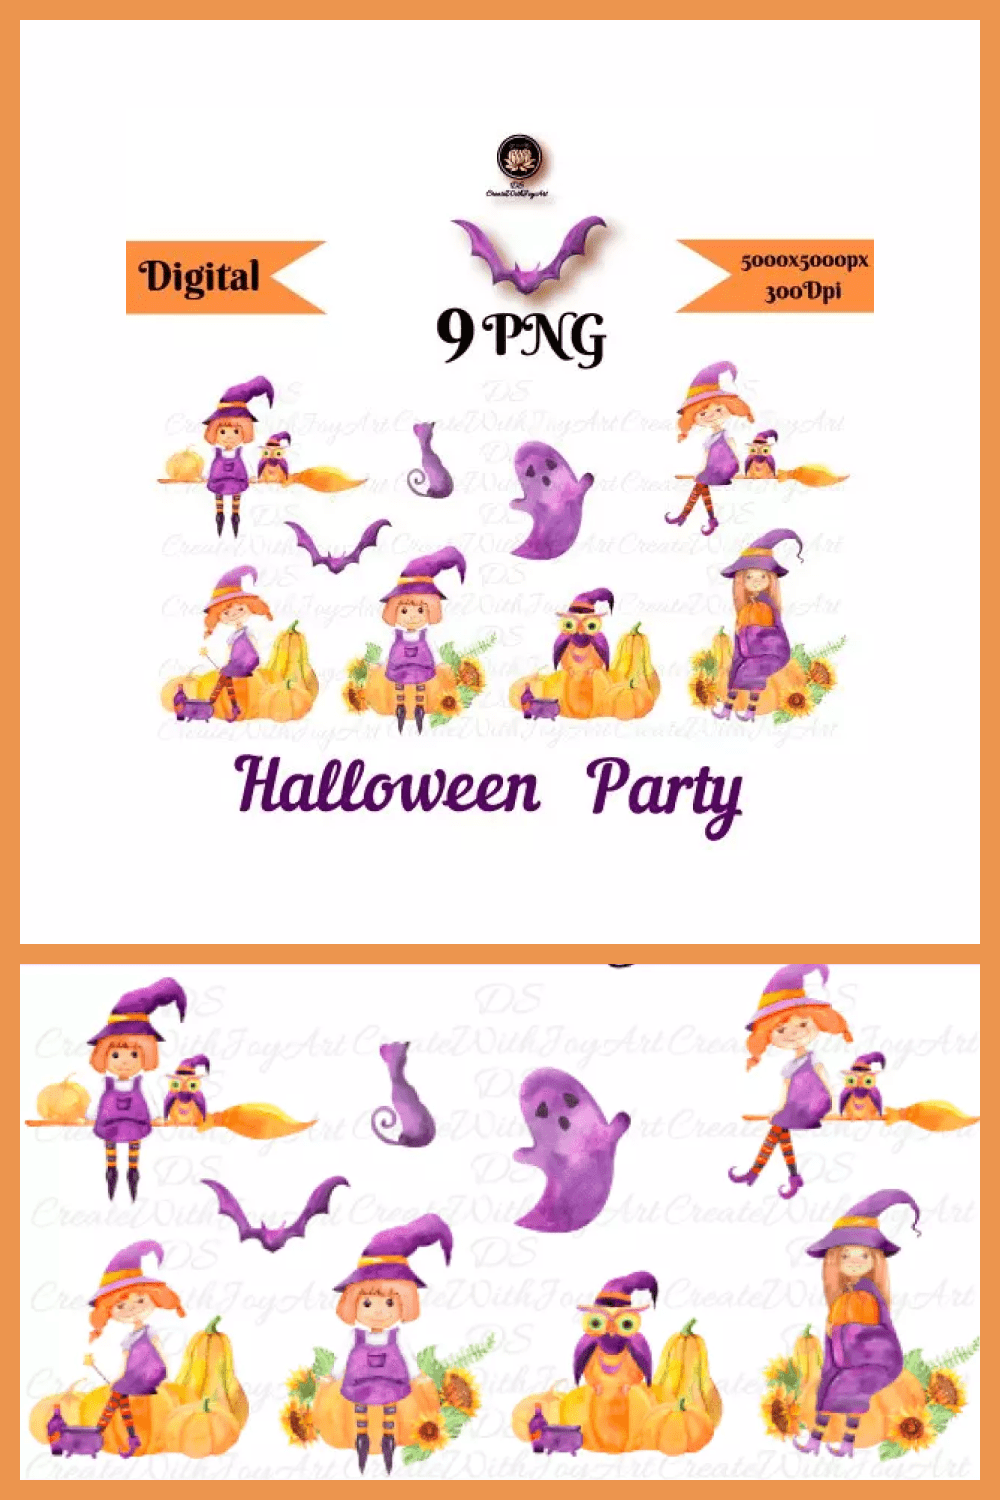 Collage of images of little witches in purple dresses with pumpkins, ghosts and cats.